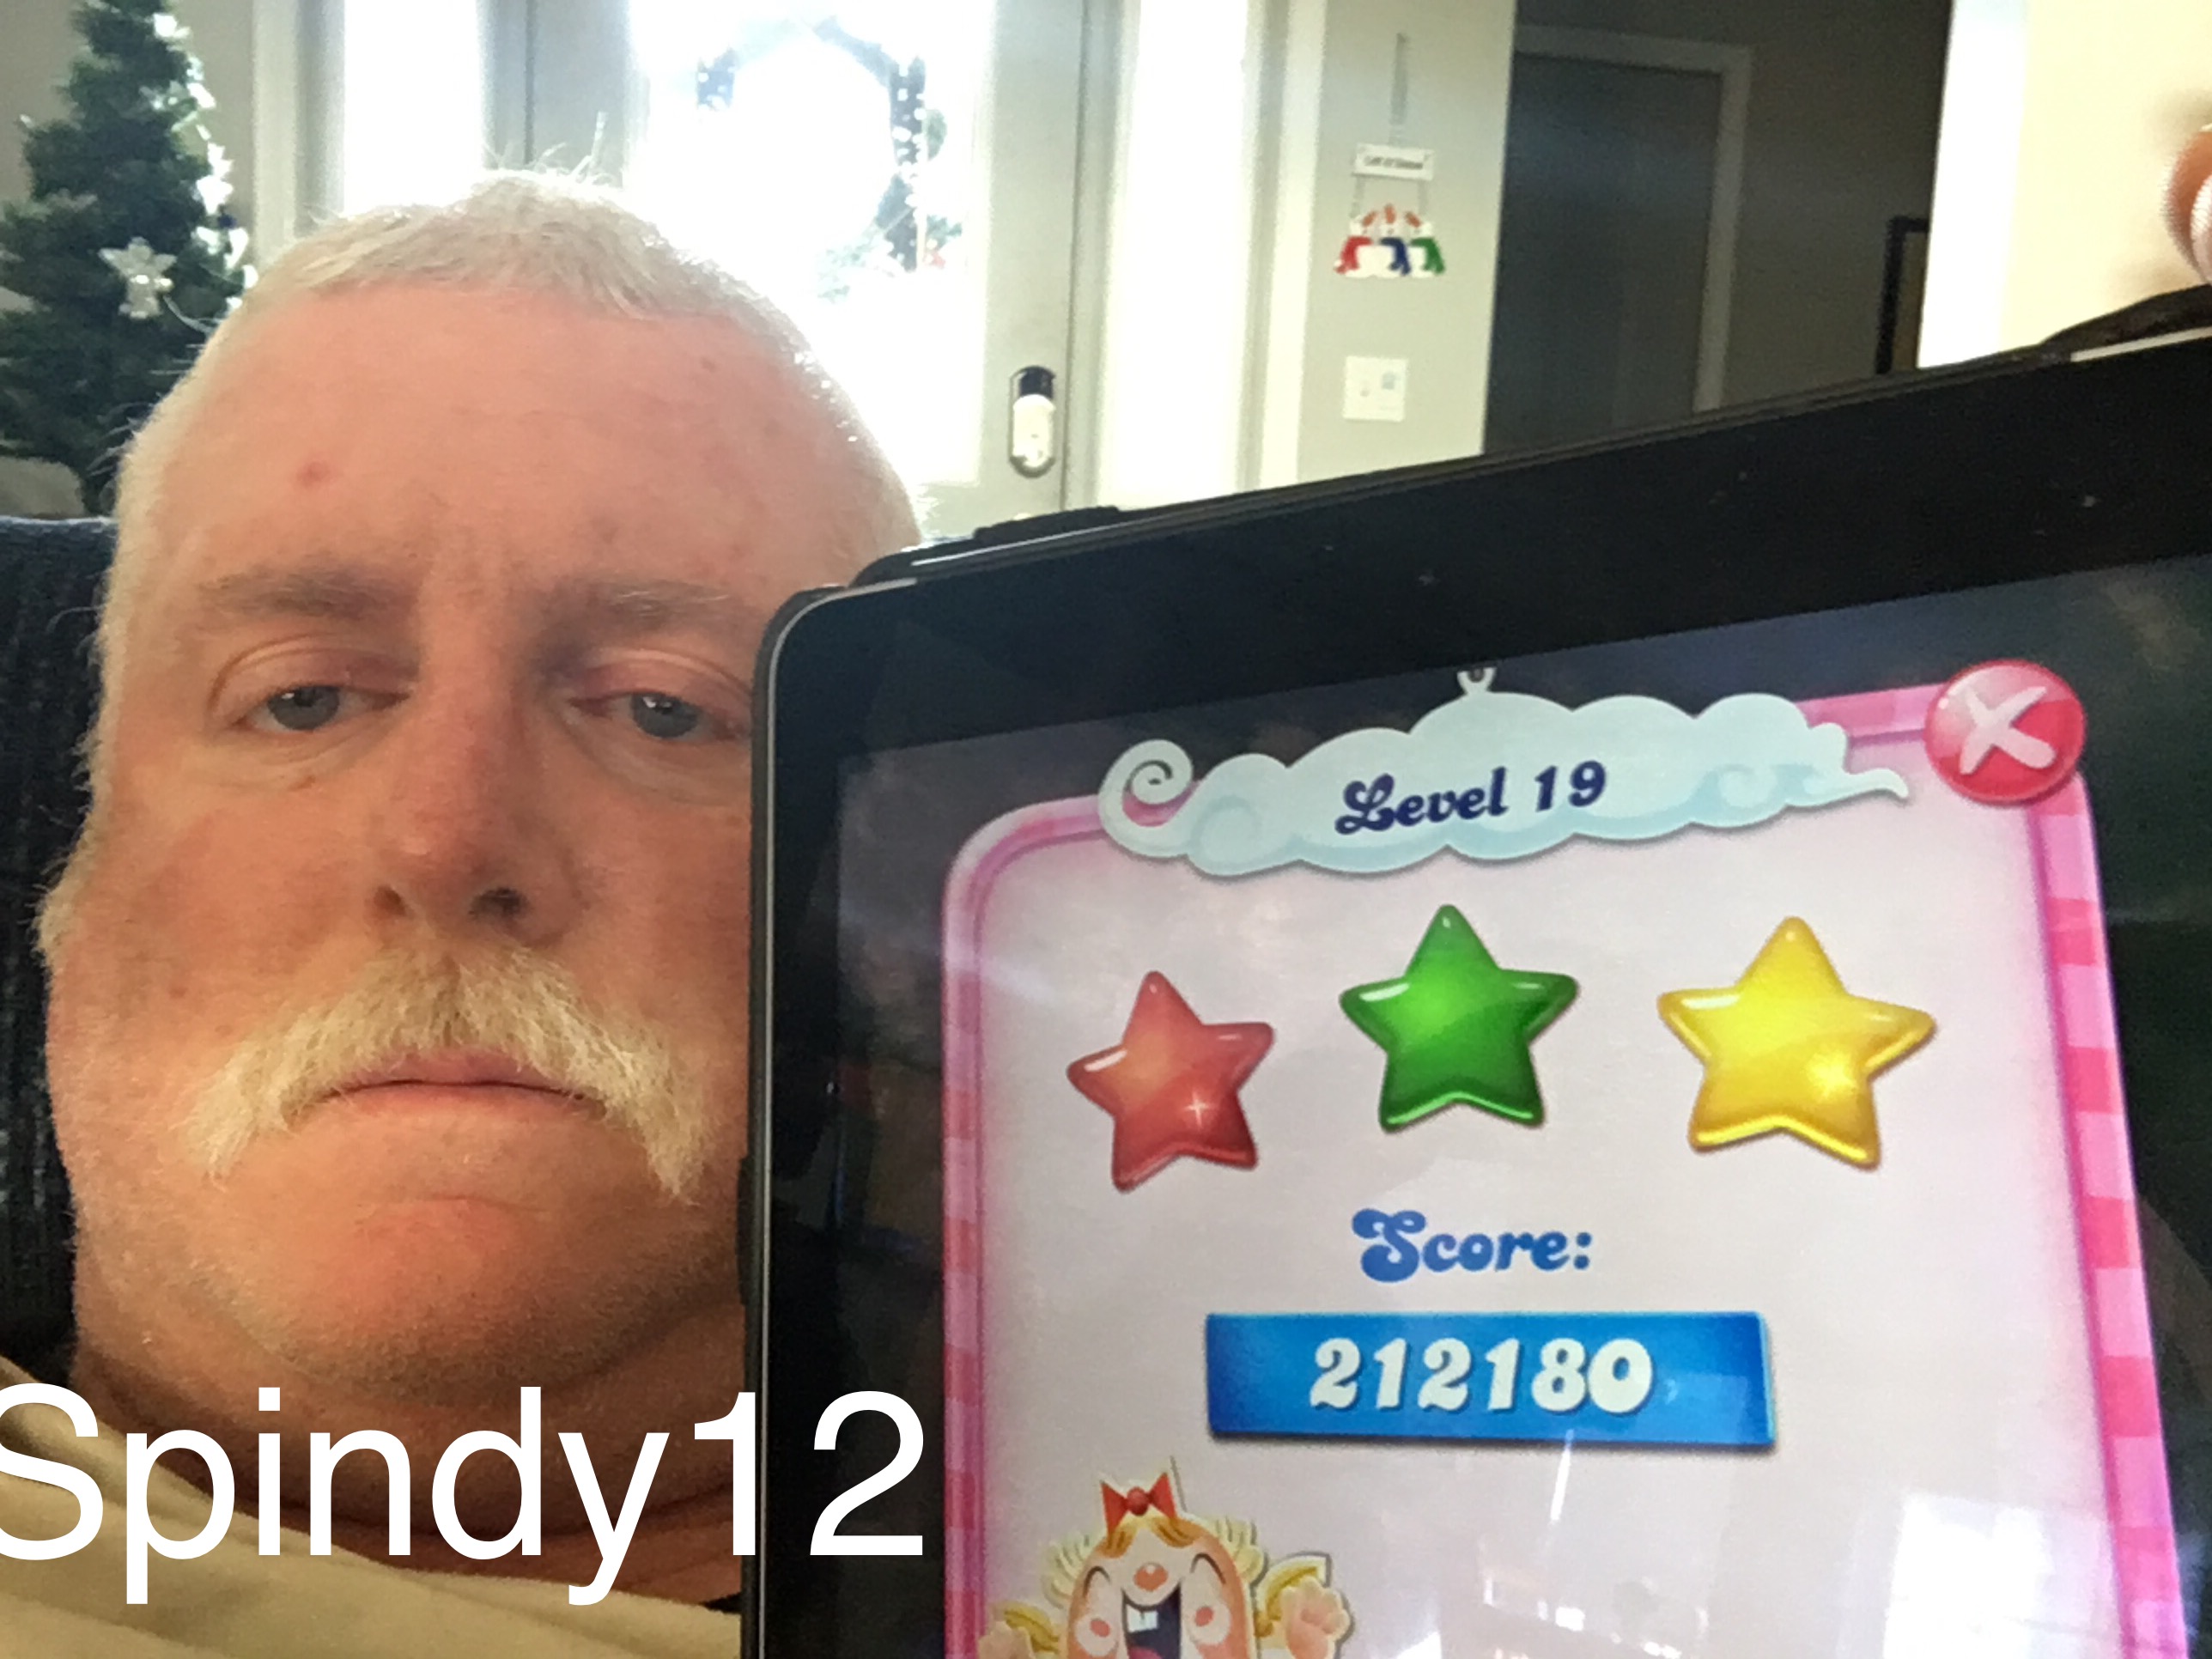 Spindy12: Candy Crush Saga: Level 019 (iOS) 212,180 points on 2016-12-20 15:57:07